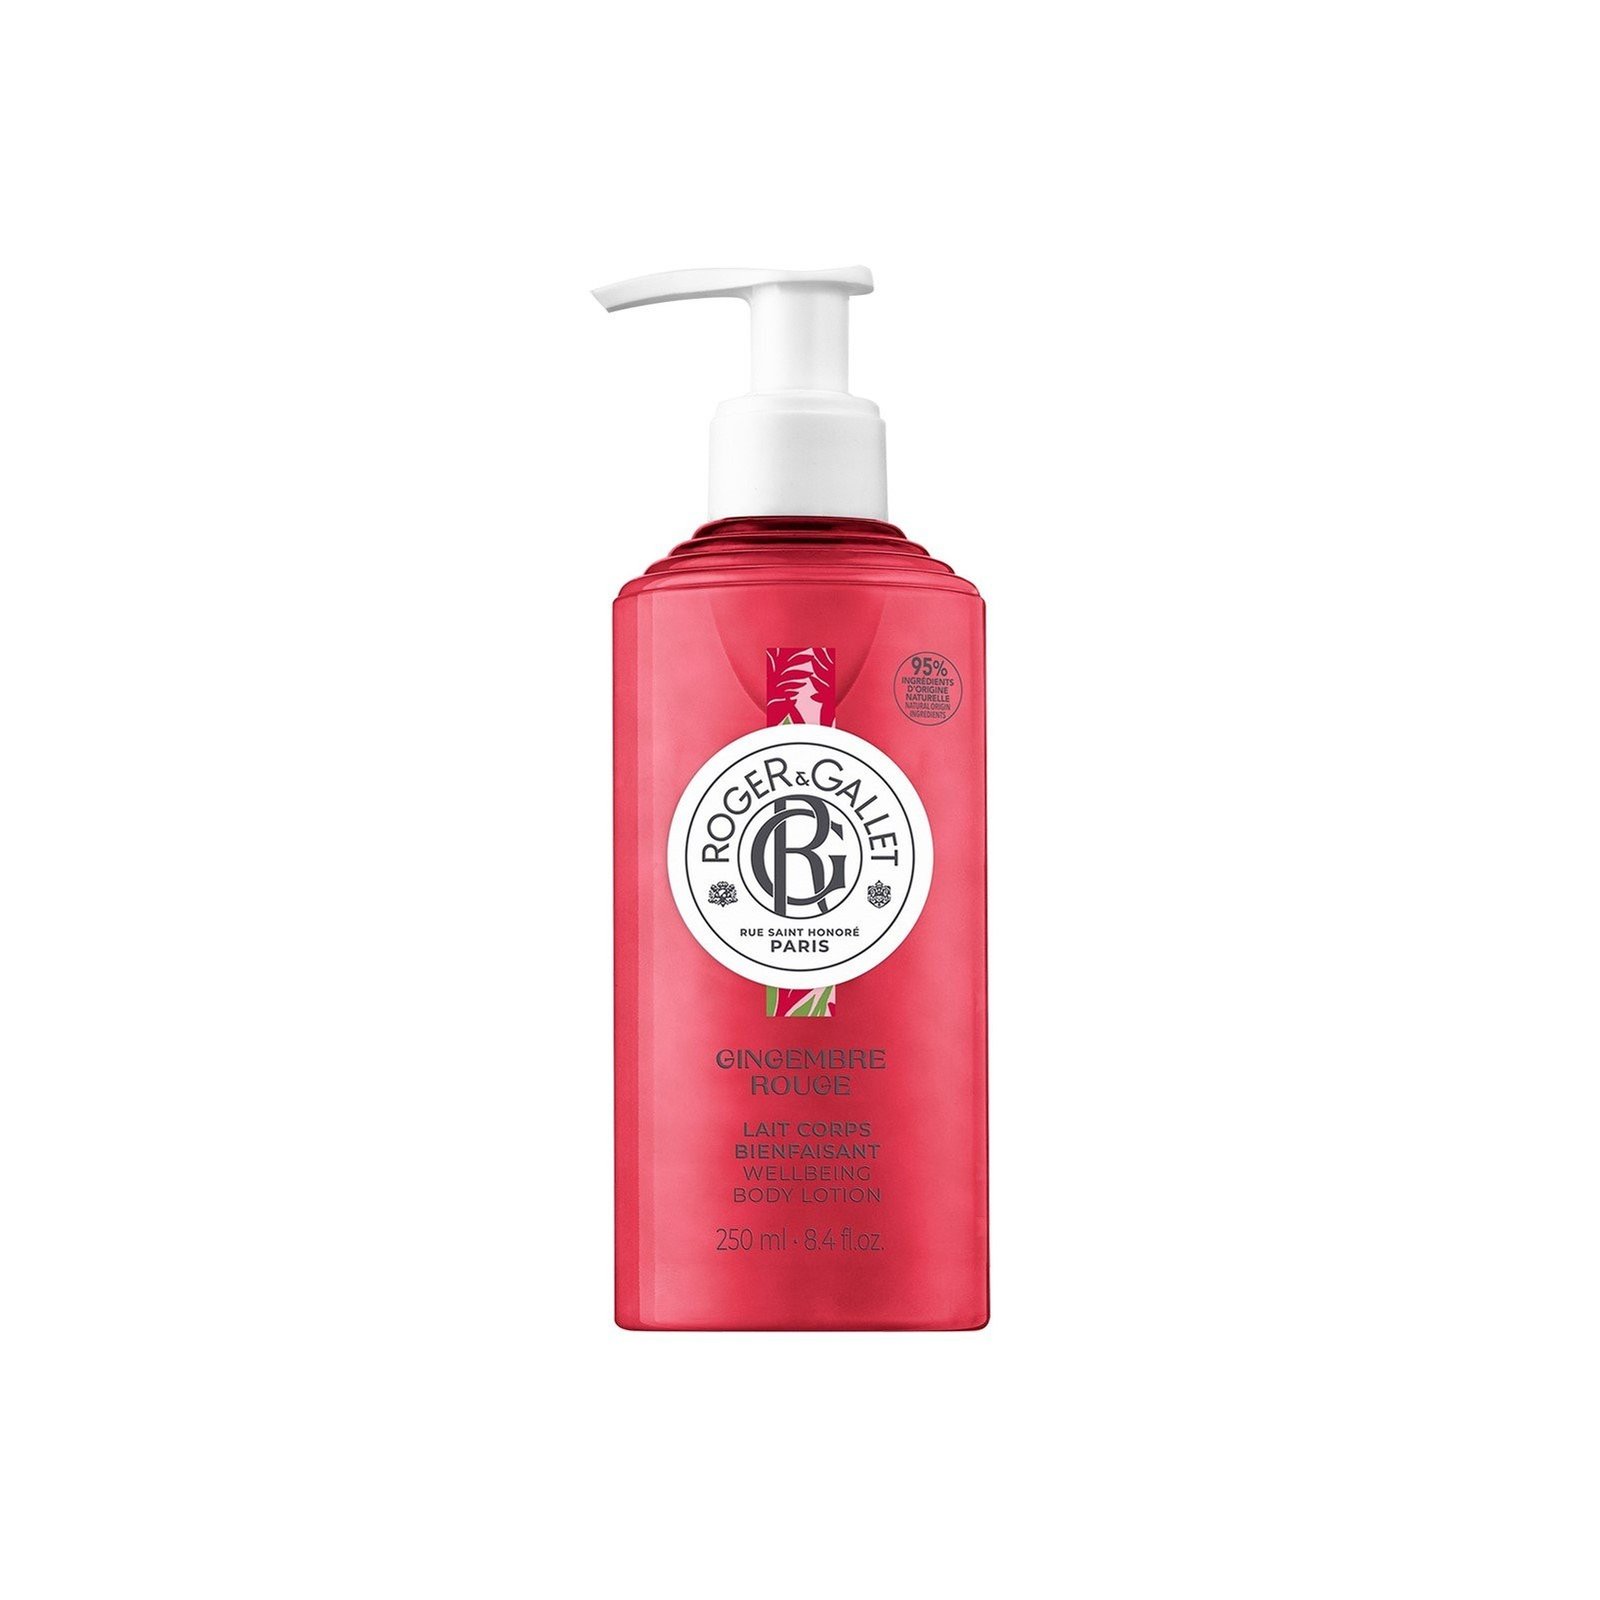 Roger&Gallet Gingembre Rouge Wellbeing Body Lotion 250ml (8.4 fl oz)